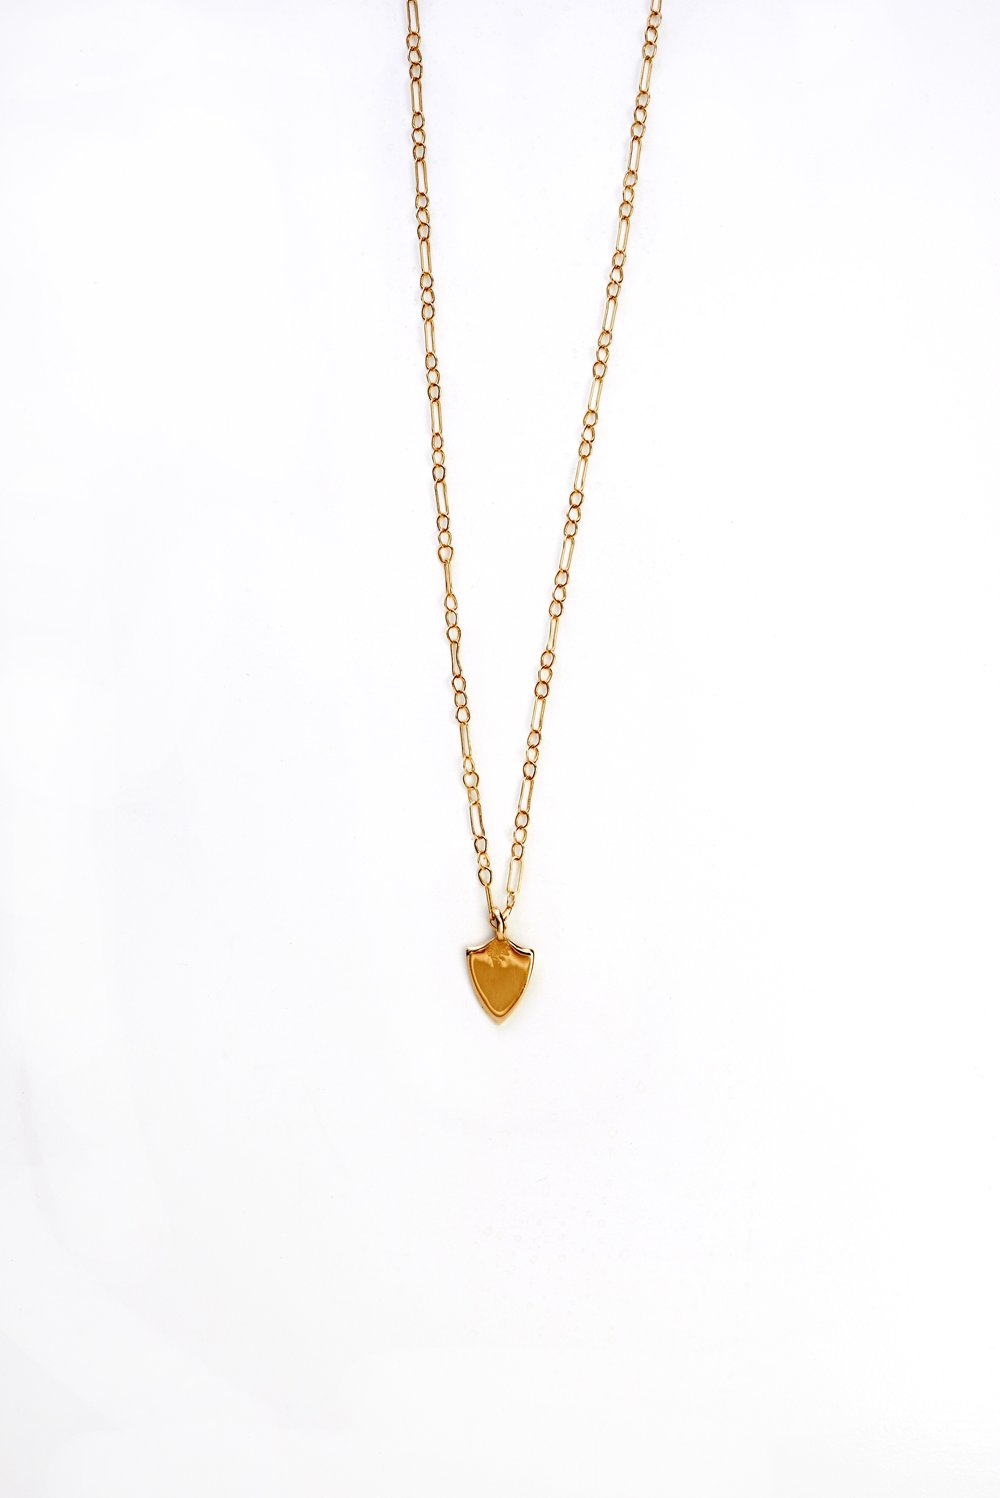 EA Collection 14k Gold Shield Necklace , Gold Delicate Neckalce, Gold Necklace, Gold Chain, Shield Pendant,  